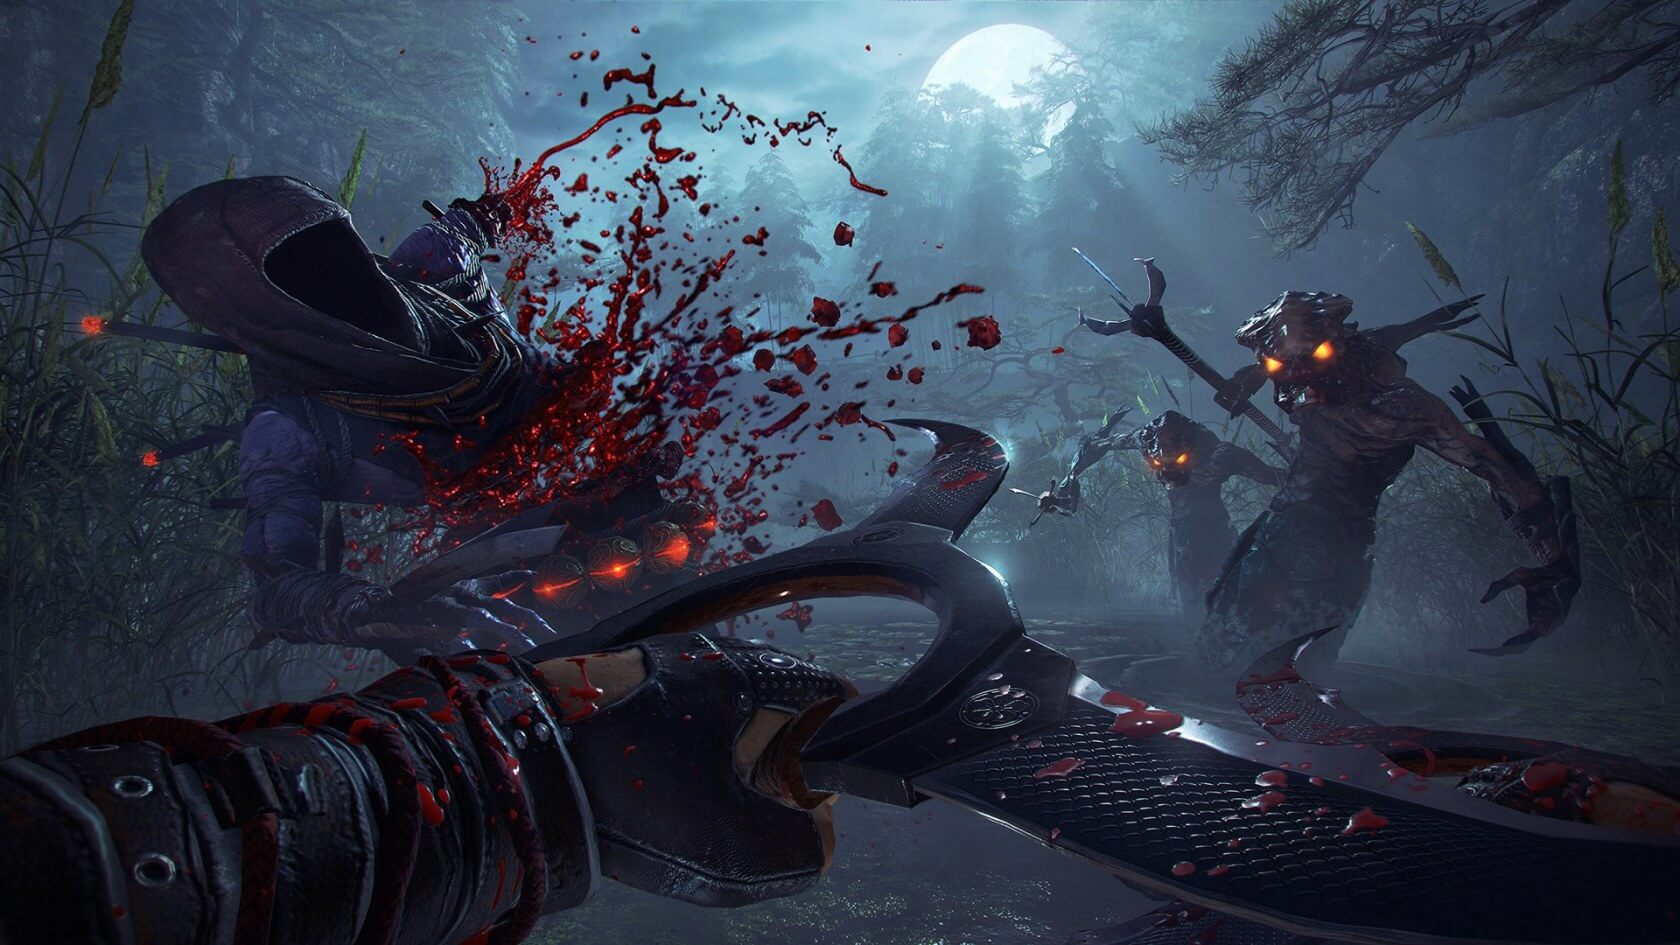 You can snag Shadow Warrior 2 for free via GoG for the next 48 hours